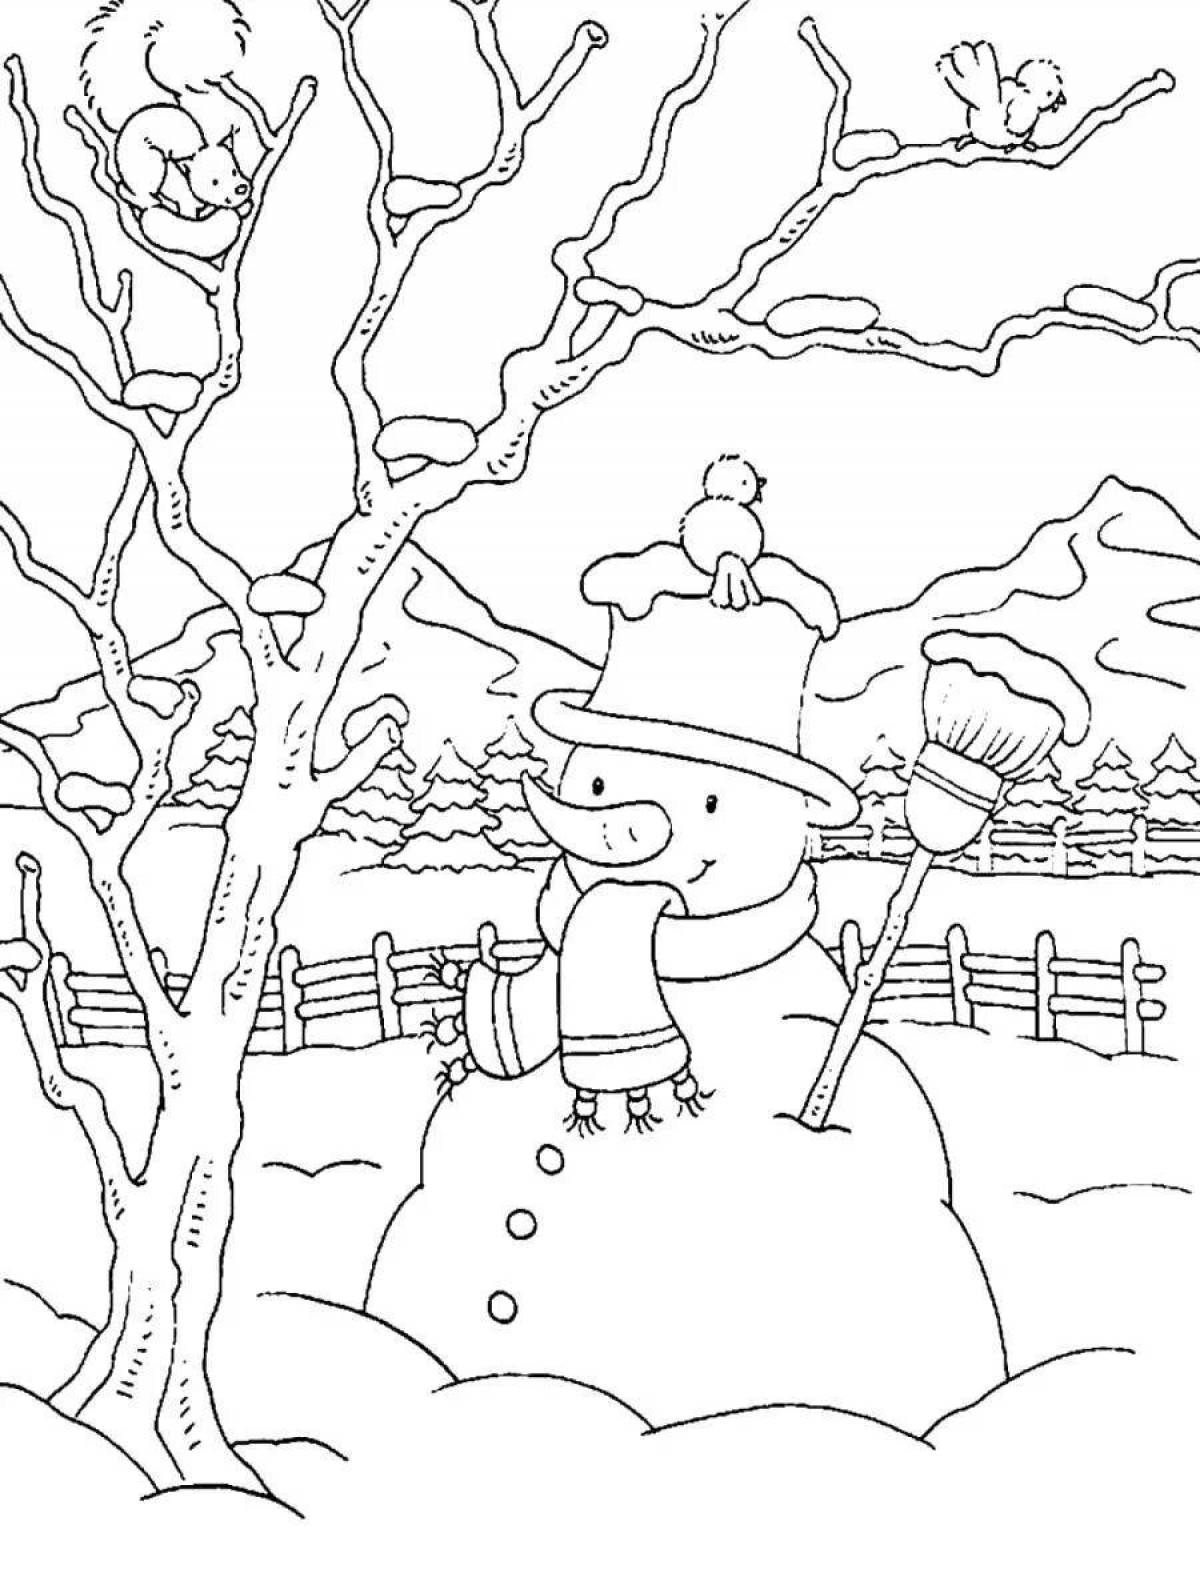 Coloring book majestic winter landscape for children 6-7 years old